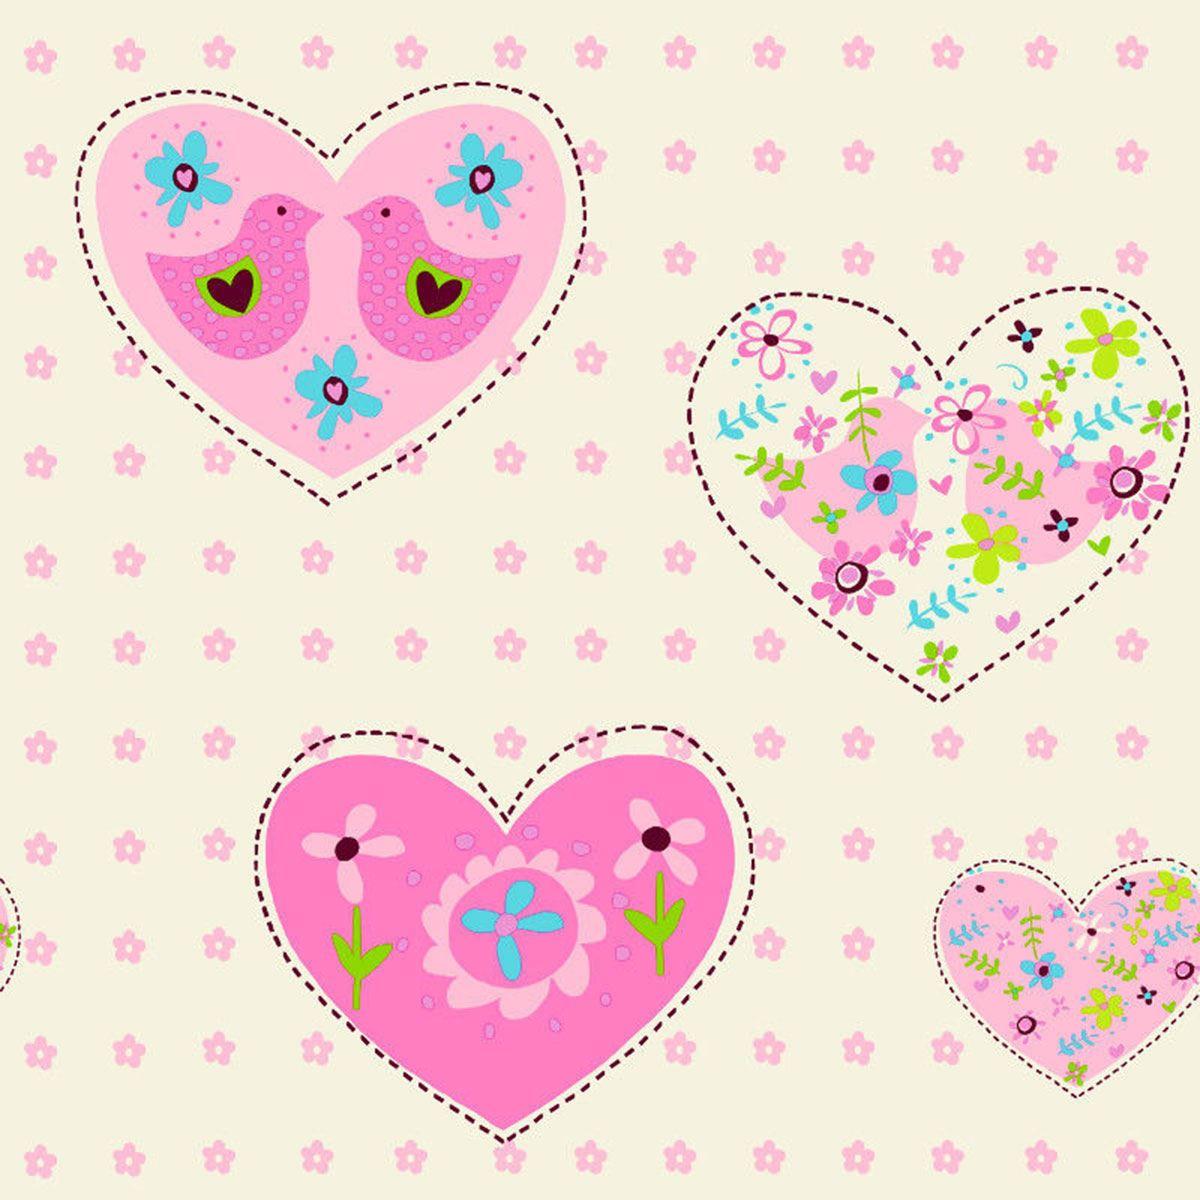 Details About Amour Hearts & Birds Wallpaper